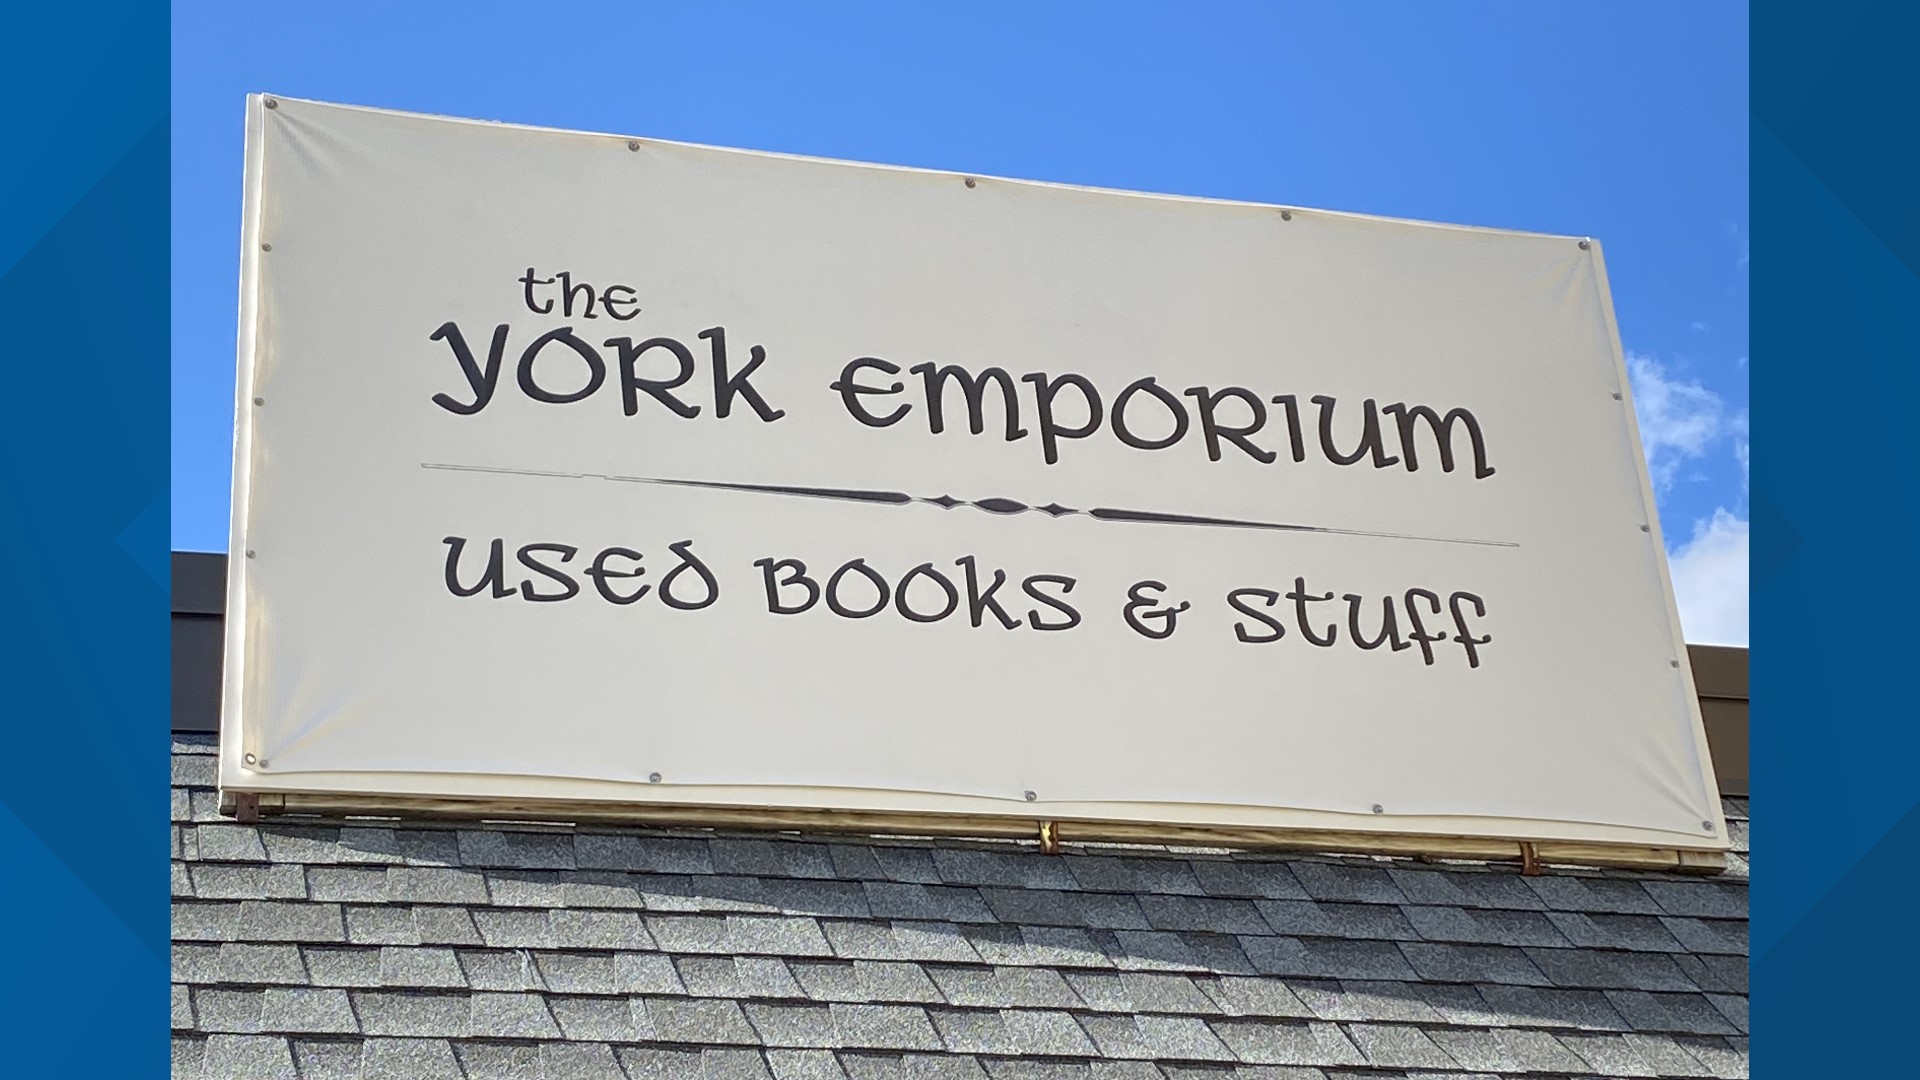 The York Emporium owner is retiring after nearly 20 years of service, but the story of the business continues under new ownership.